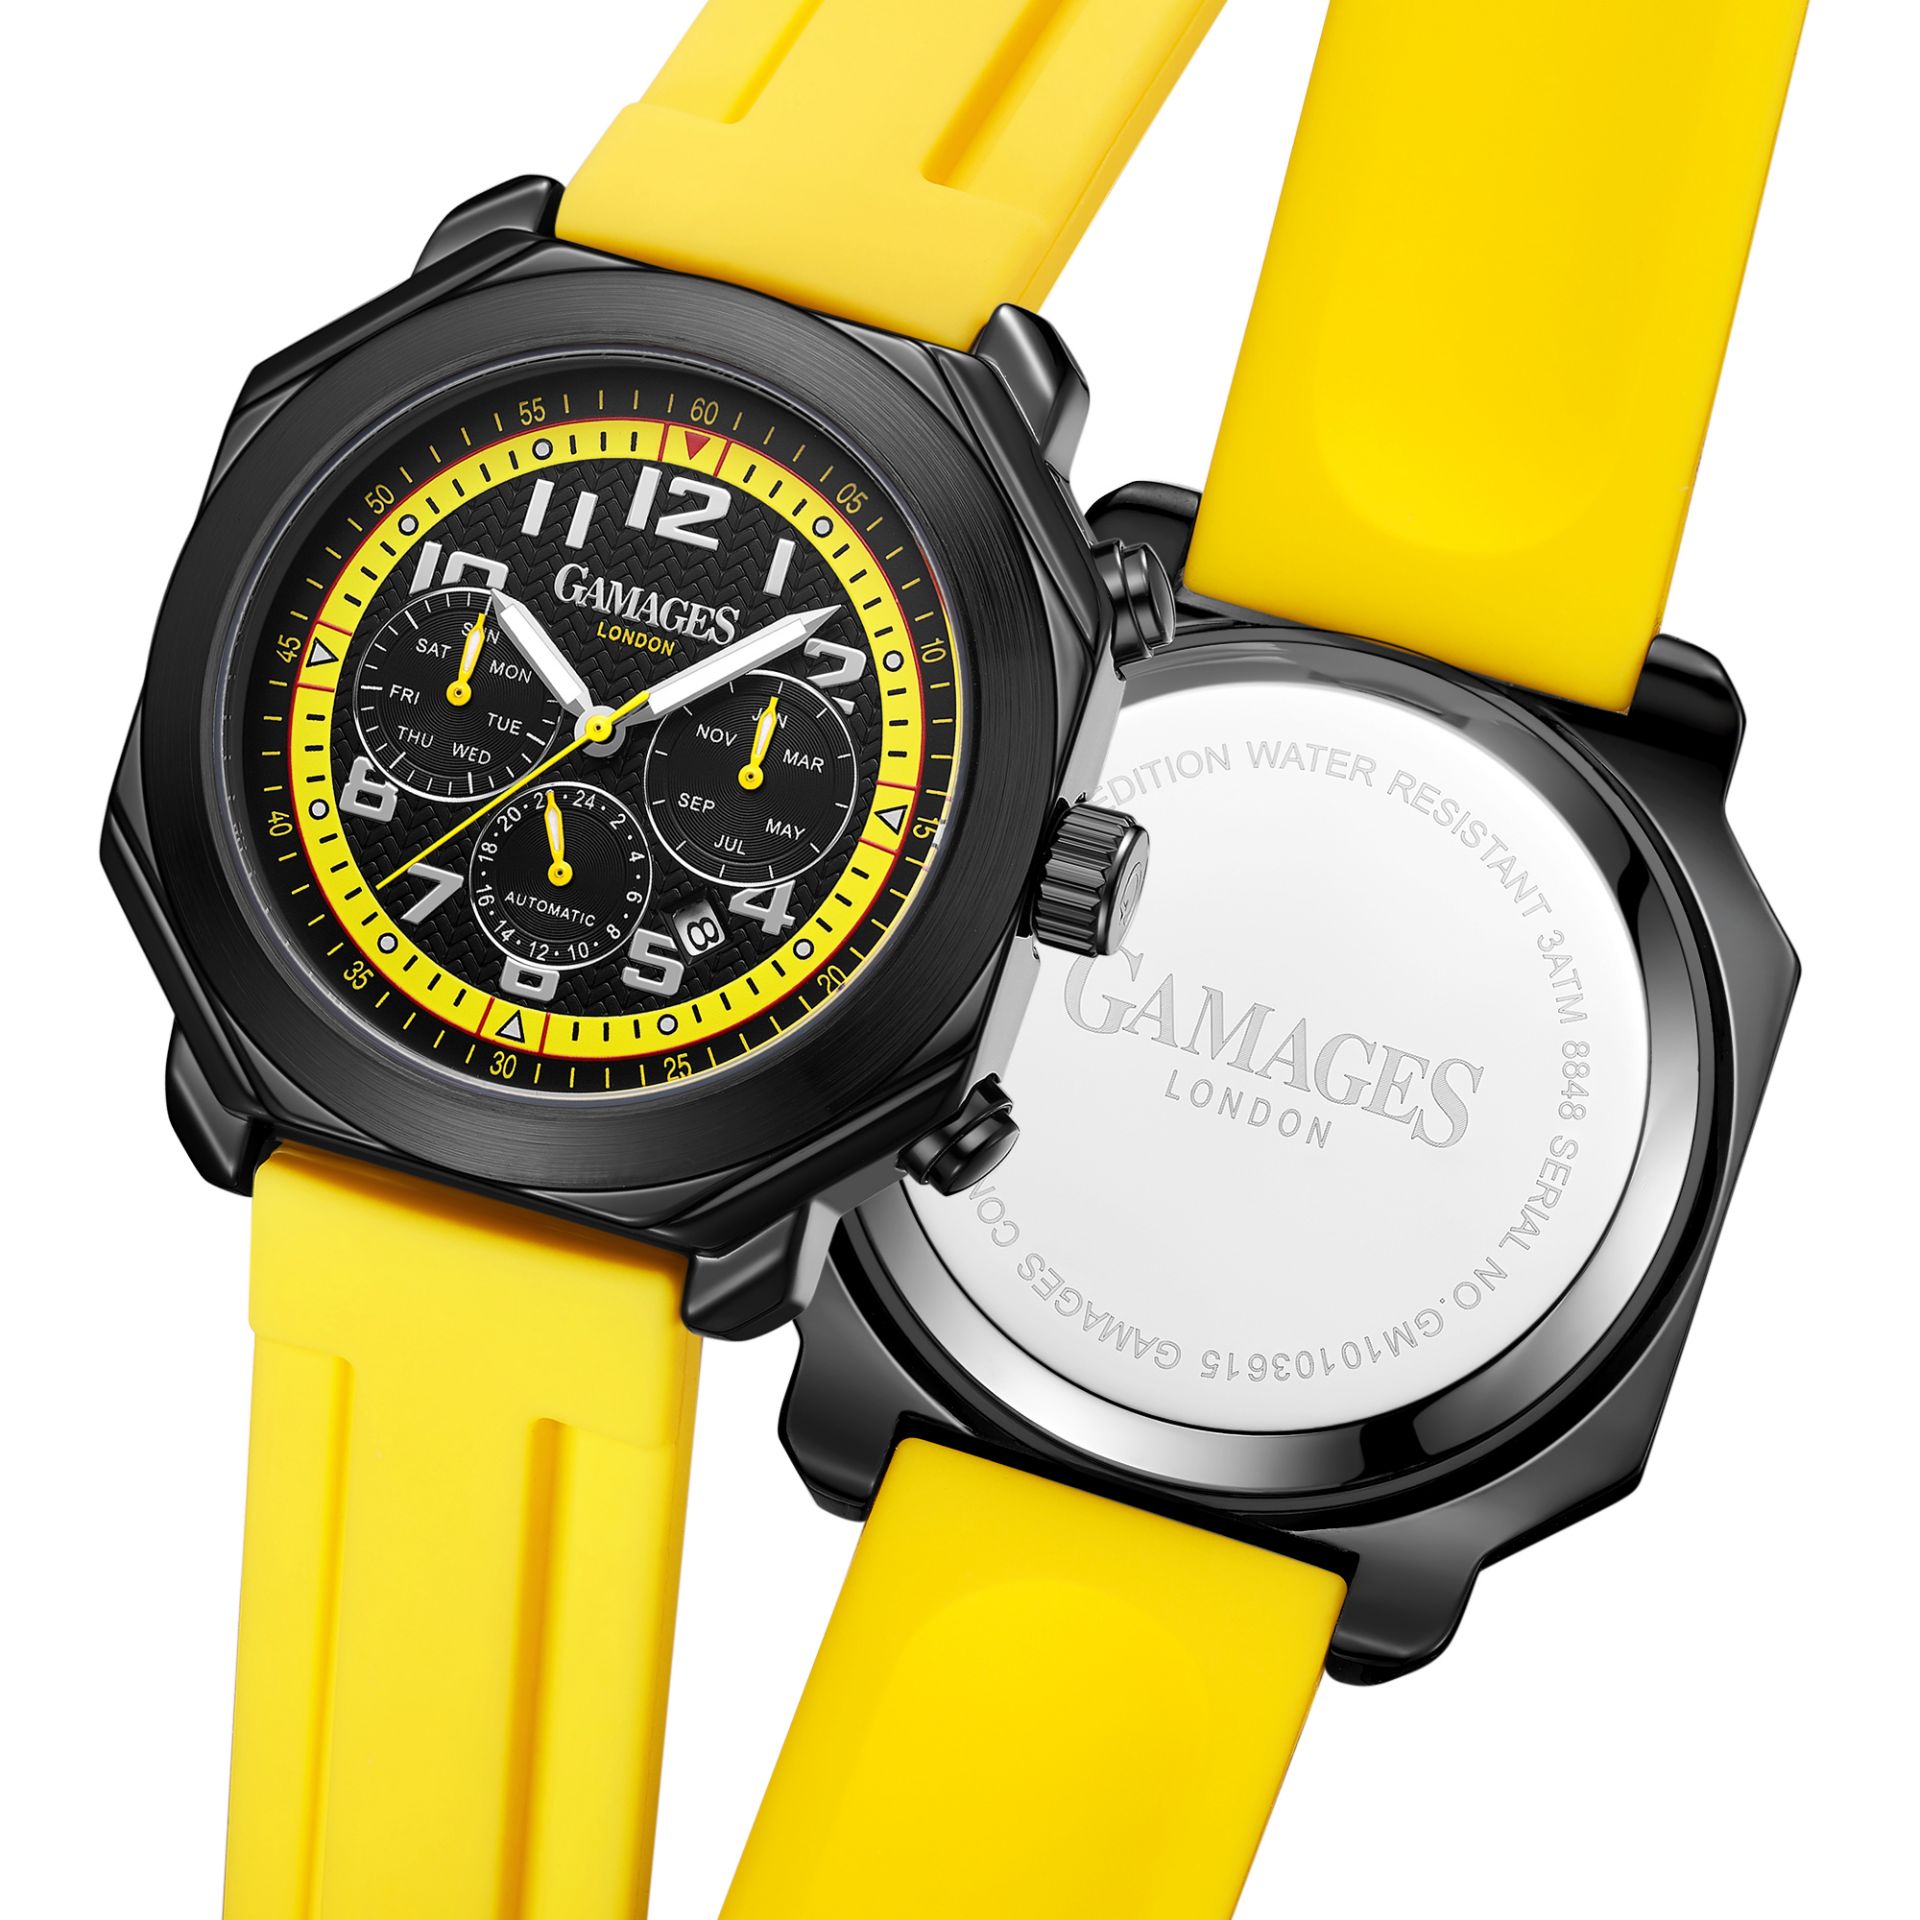 Ltd Edition Hand Assembled Gamages Contemporary Automatic Yellow Ð 5 Year Warranty & Free Delivery - Image 2 of 5